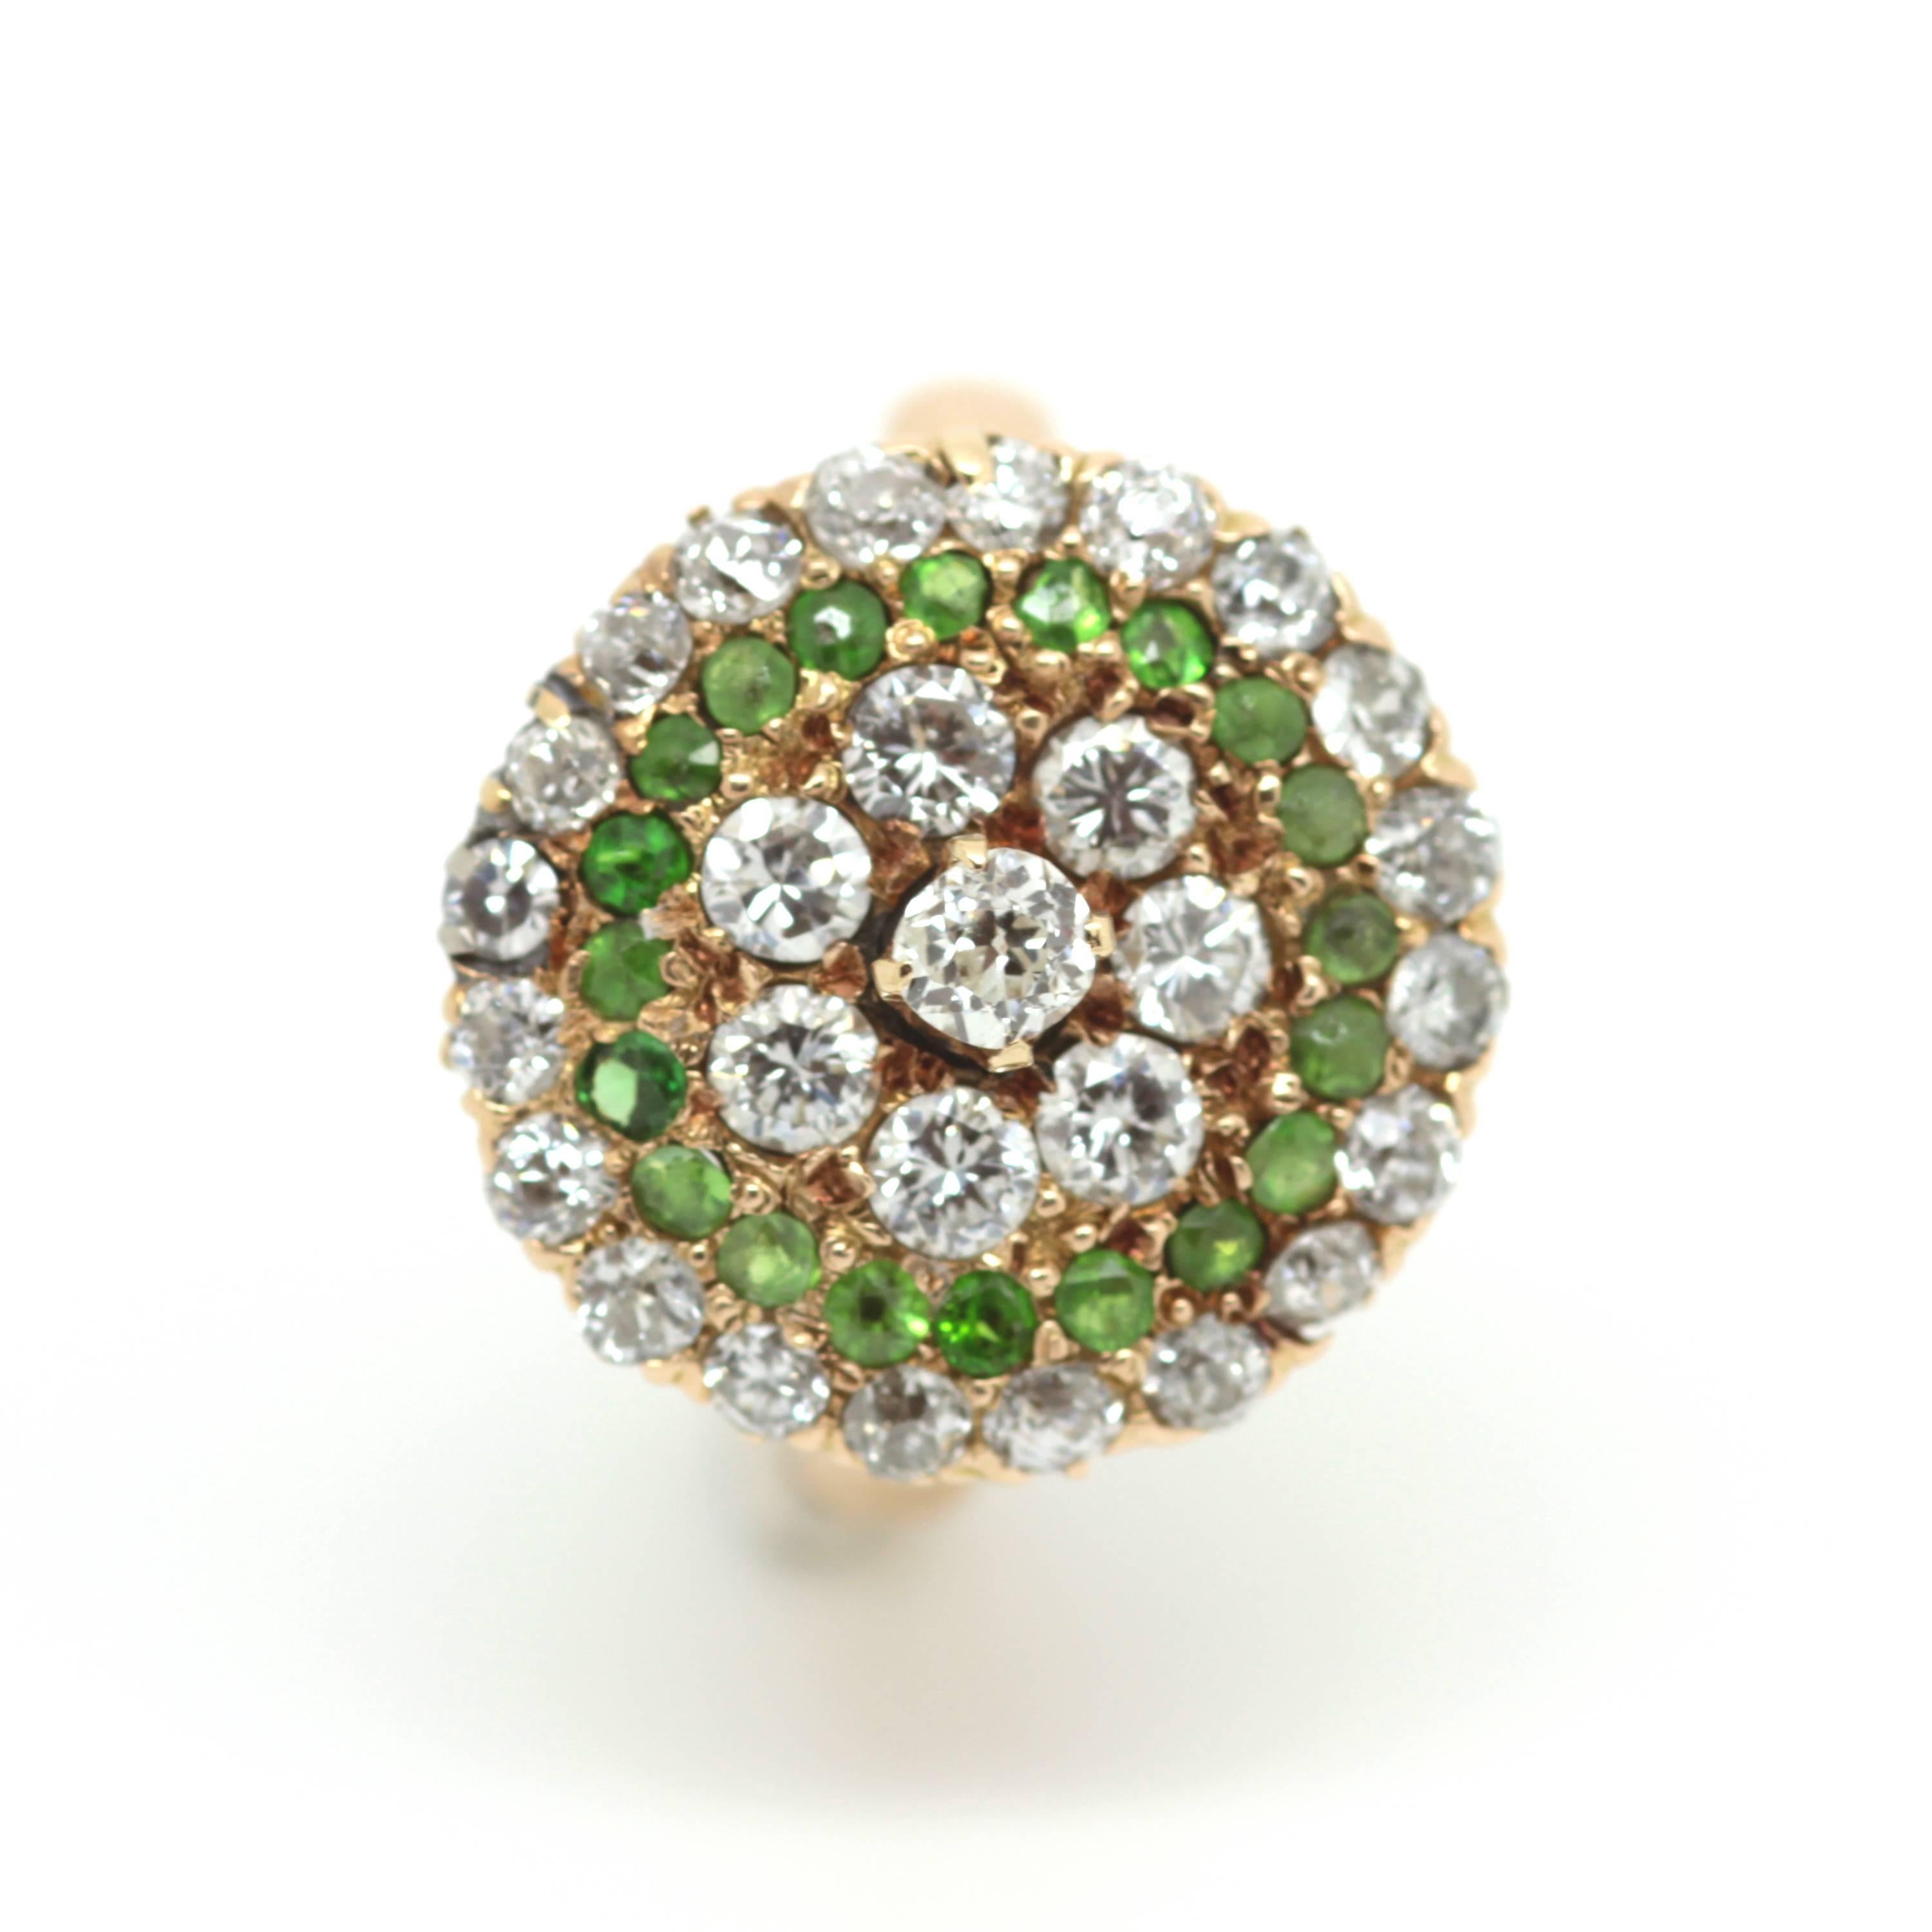 A 1920's Demantoid garnet and diamond cluster ring set in 18ct yellow gold. 